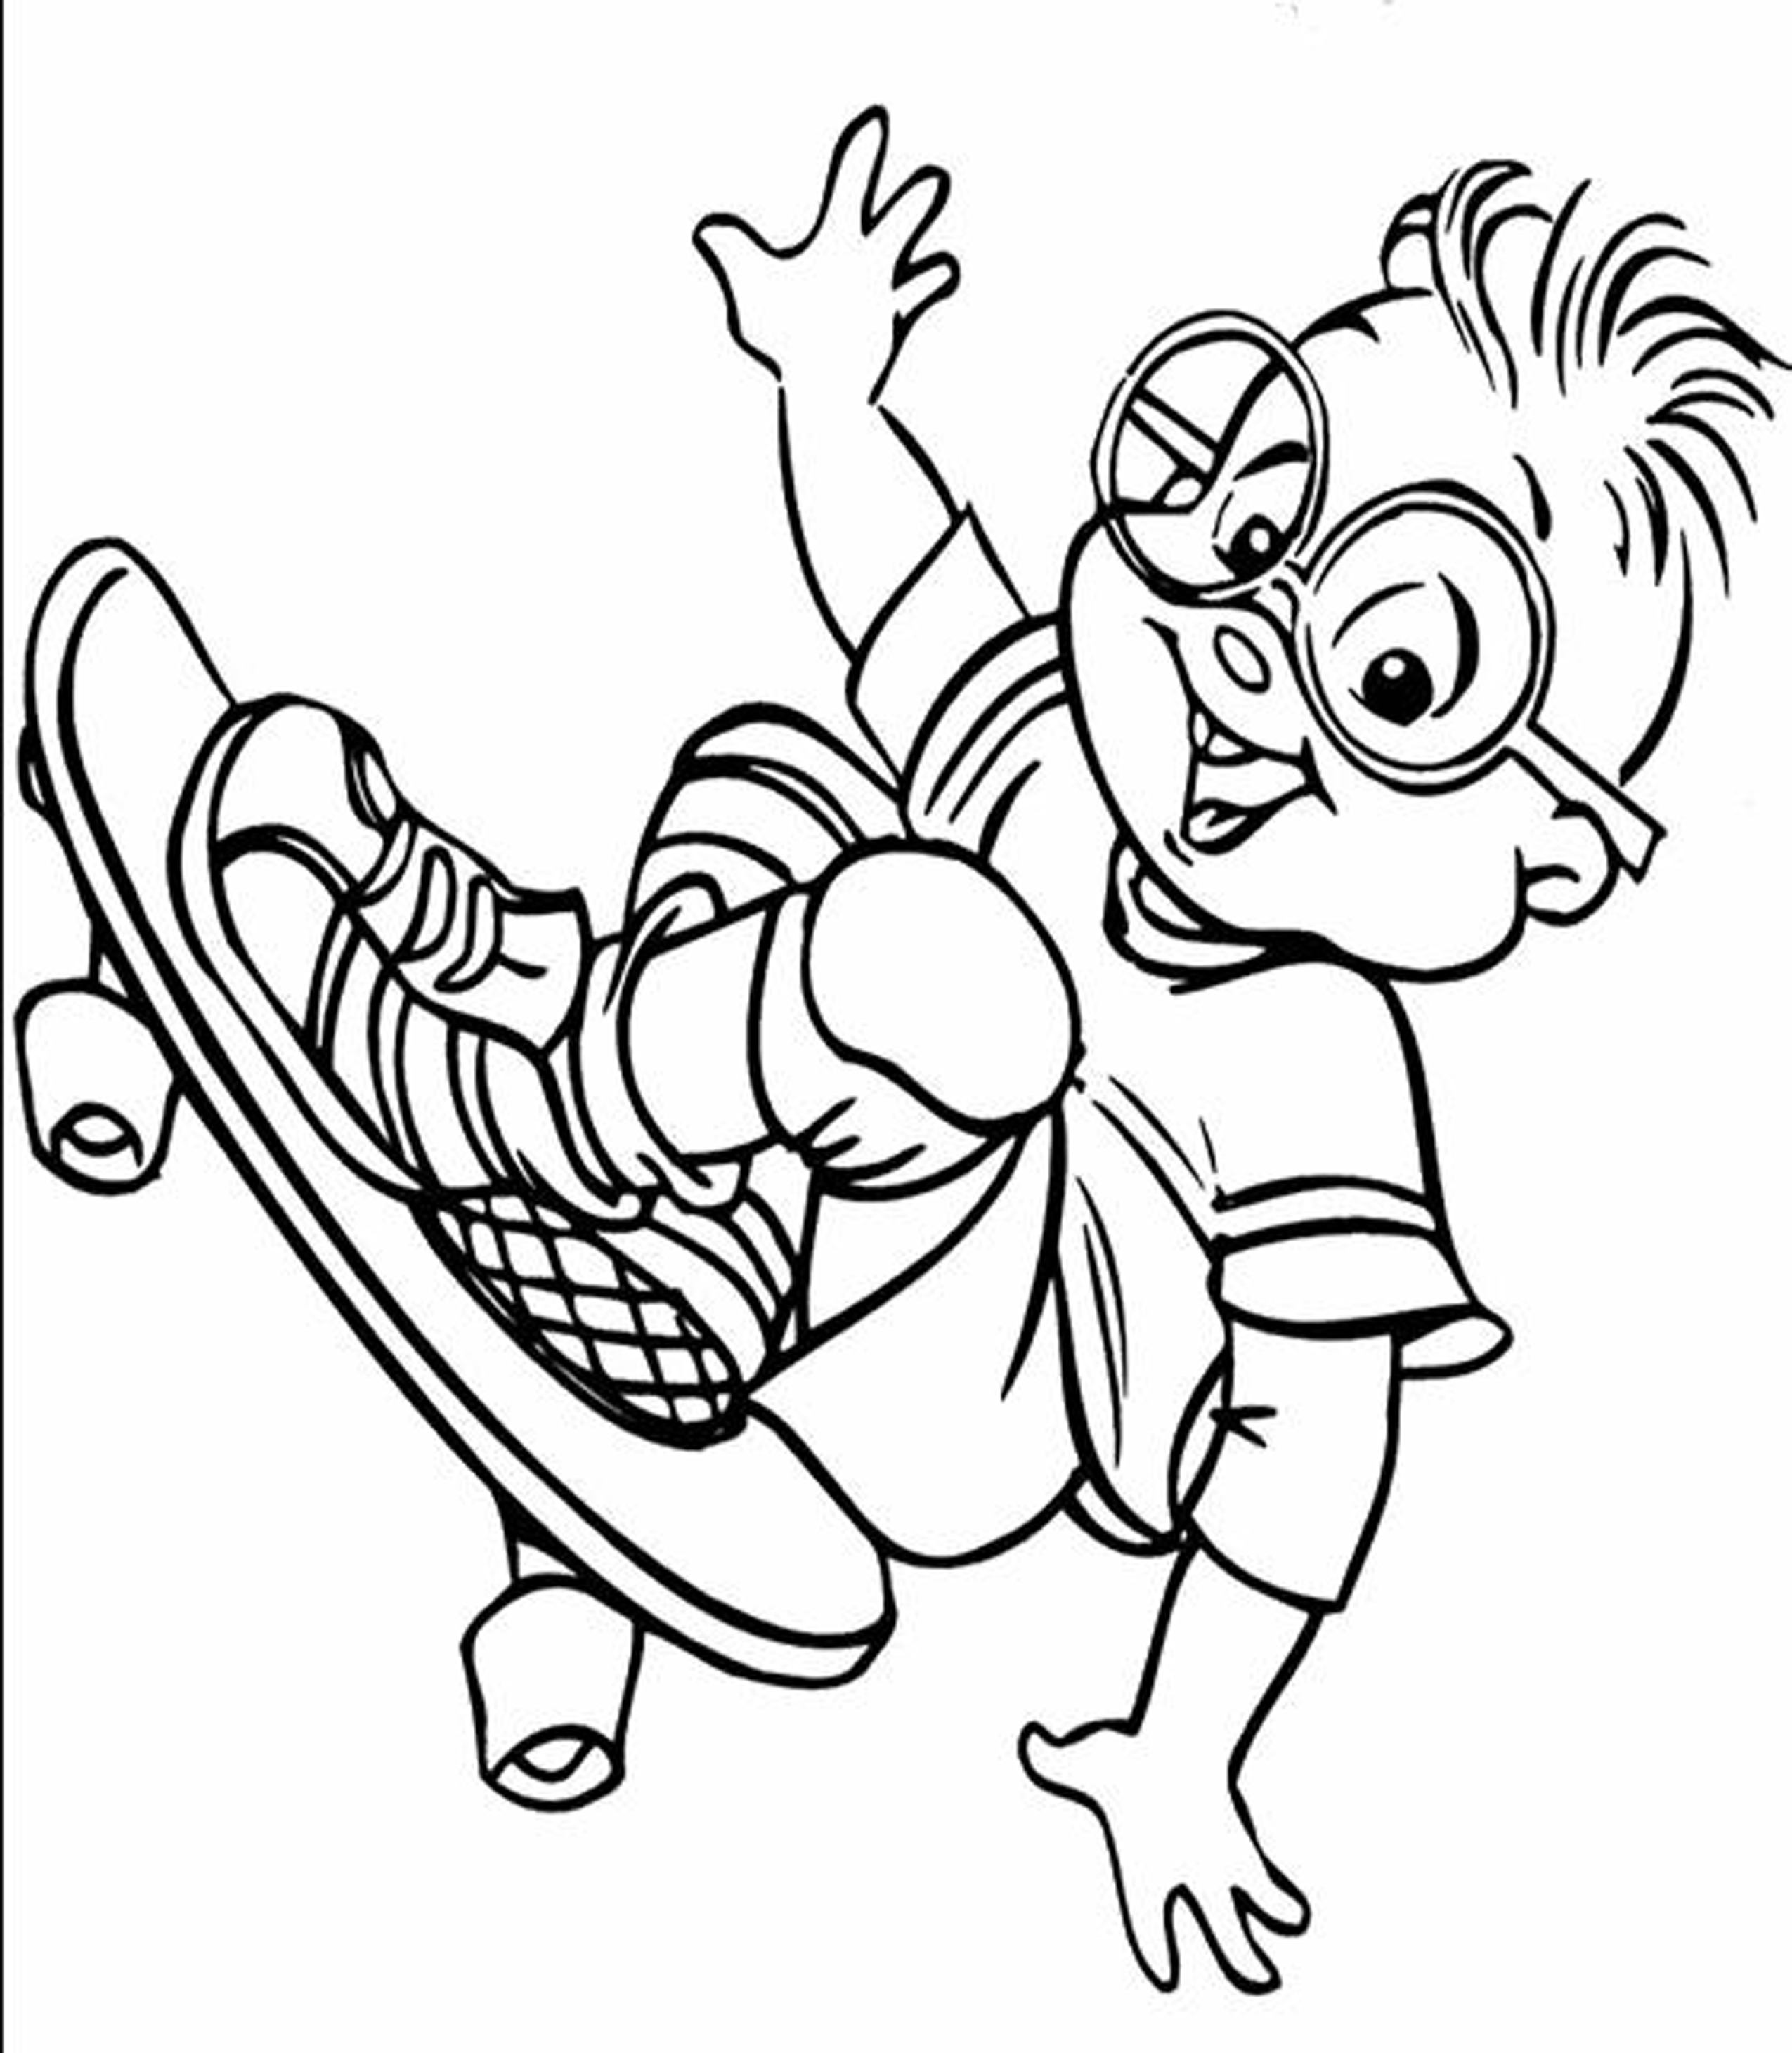 Little Boy #97484 (Characters) – Printable coloring pages